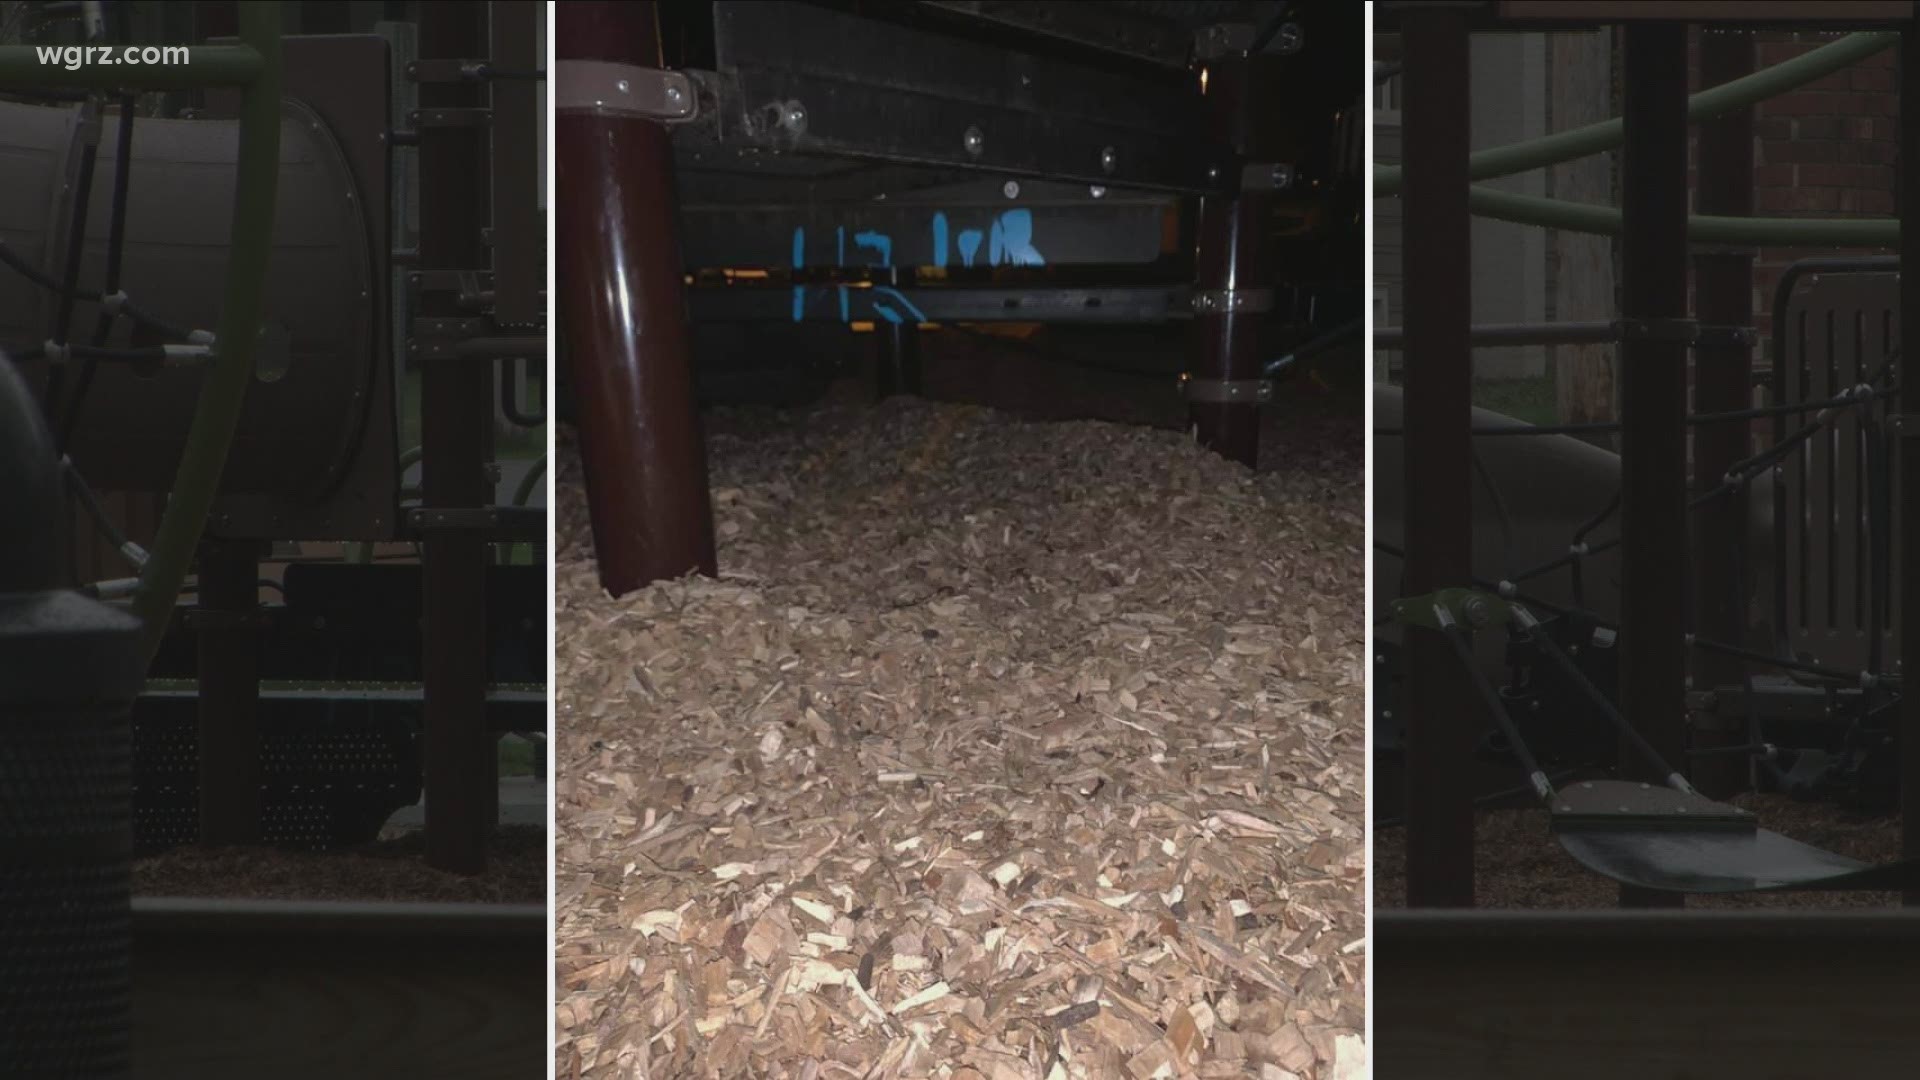 The Village of Hamburg Police department is looking for the public's help, after the community playground on Prospect Avenue was vandalized overnight.